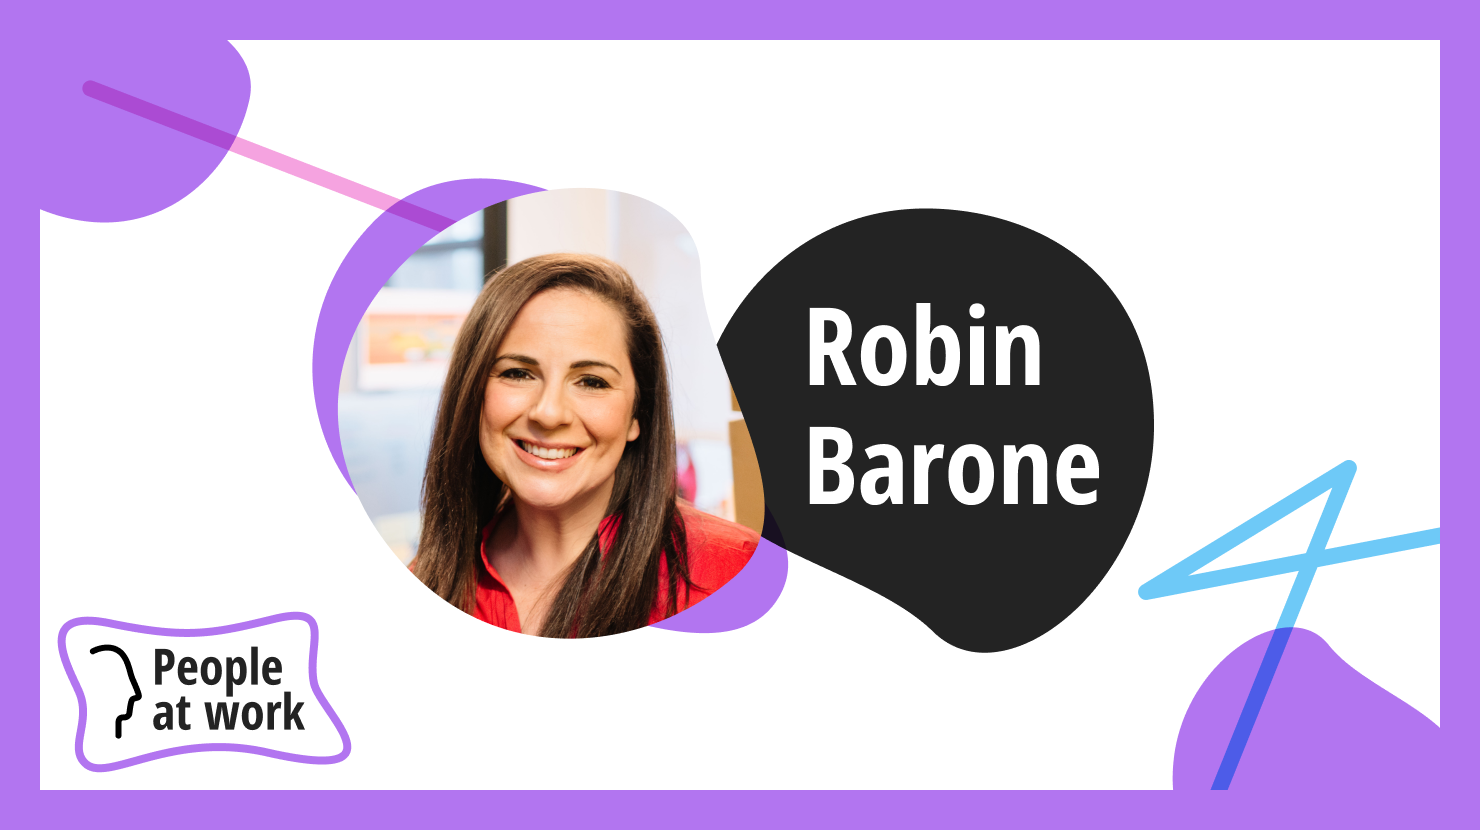 Curiosity is the foundation for workplace culture with Robin Barone